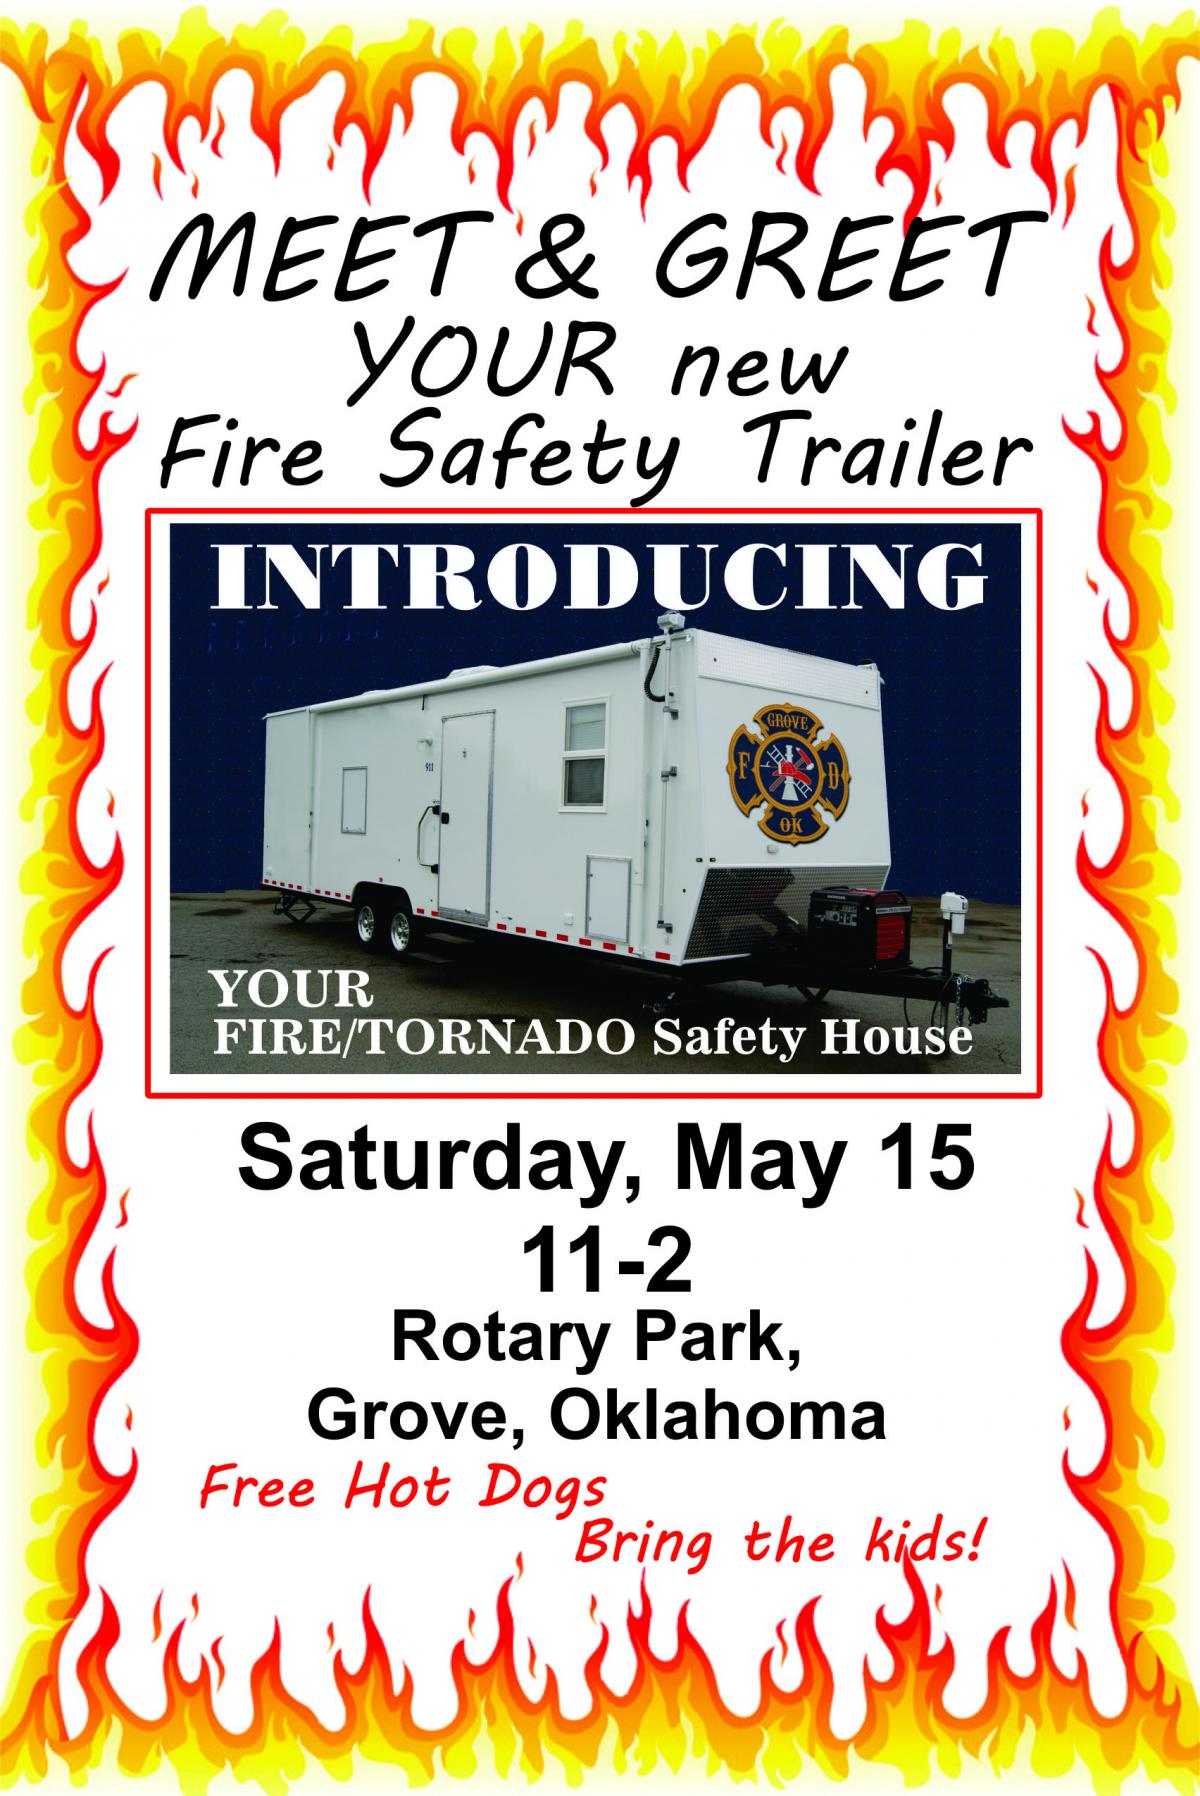 oklahoma, grove, fire department, safety trailer